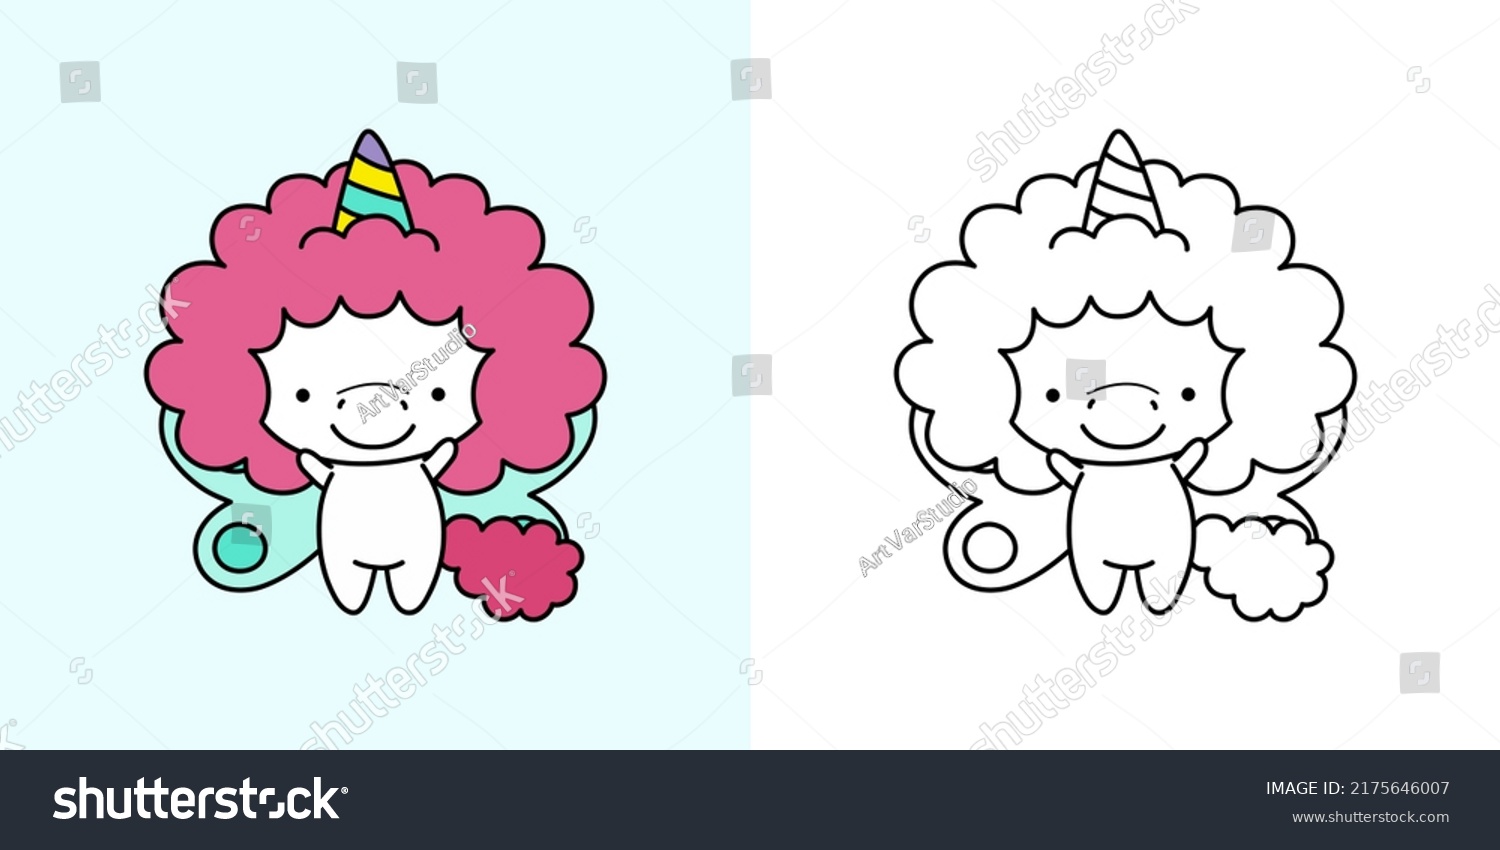 SVG of Cute Clipart Unicorn Illustration and For Coloring Page. Cartoon Clip Art Unicorn. Vector Illustration of a Kawaii for Stickers, Baby Shower, Coloring Pages, Prints for Clothes.  svg